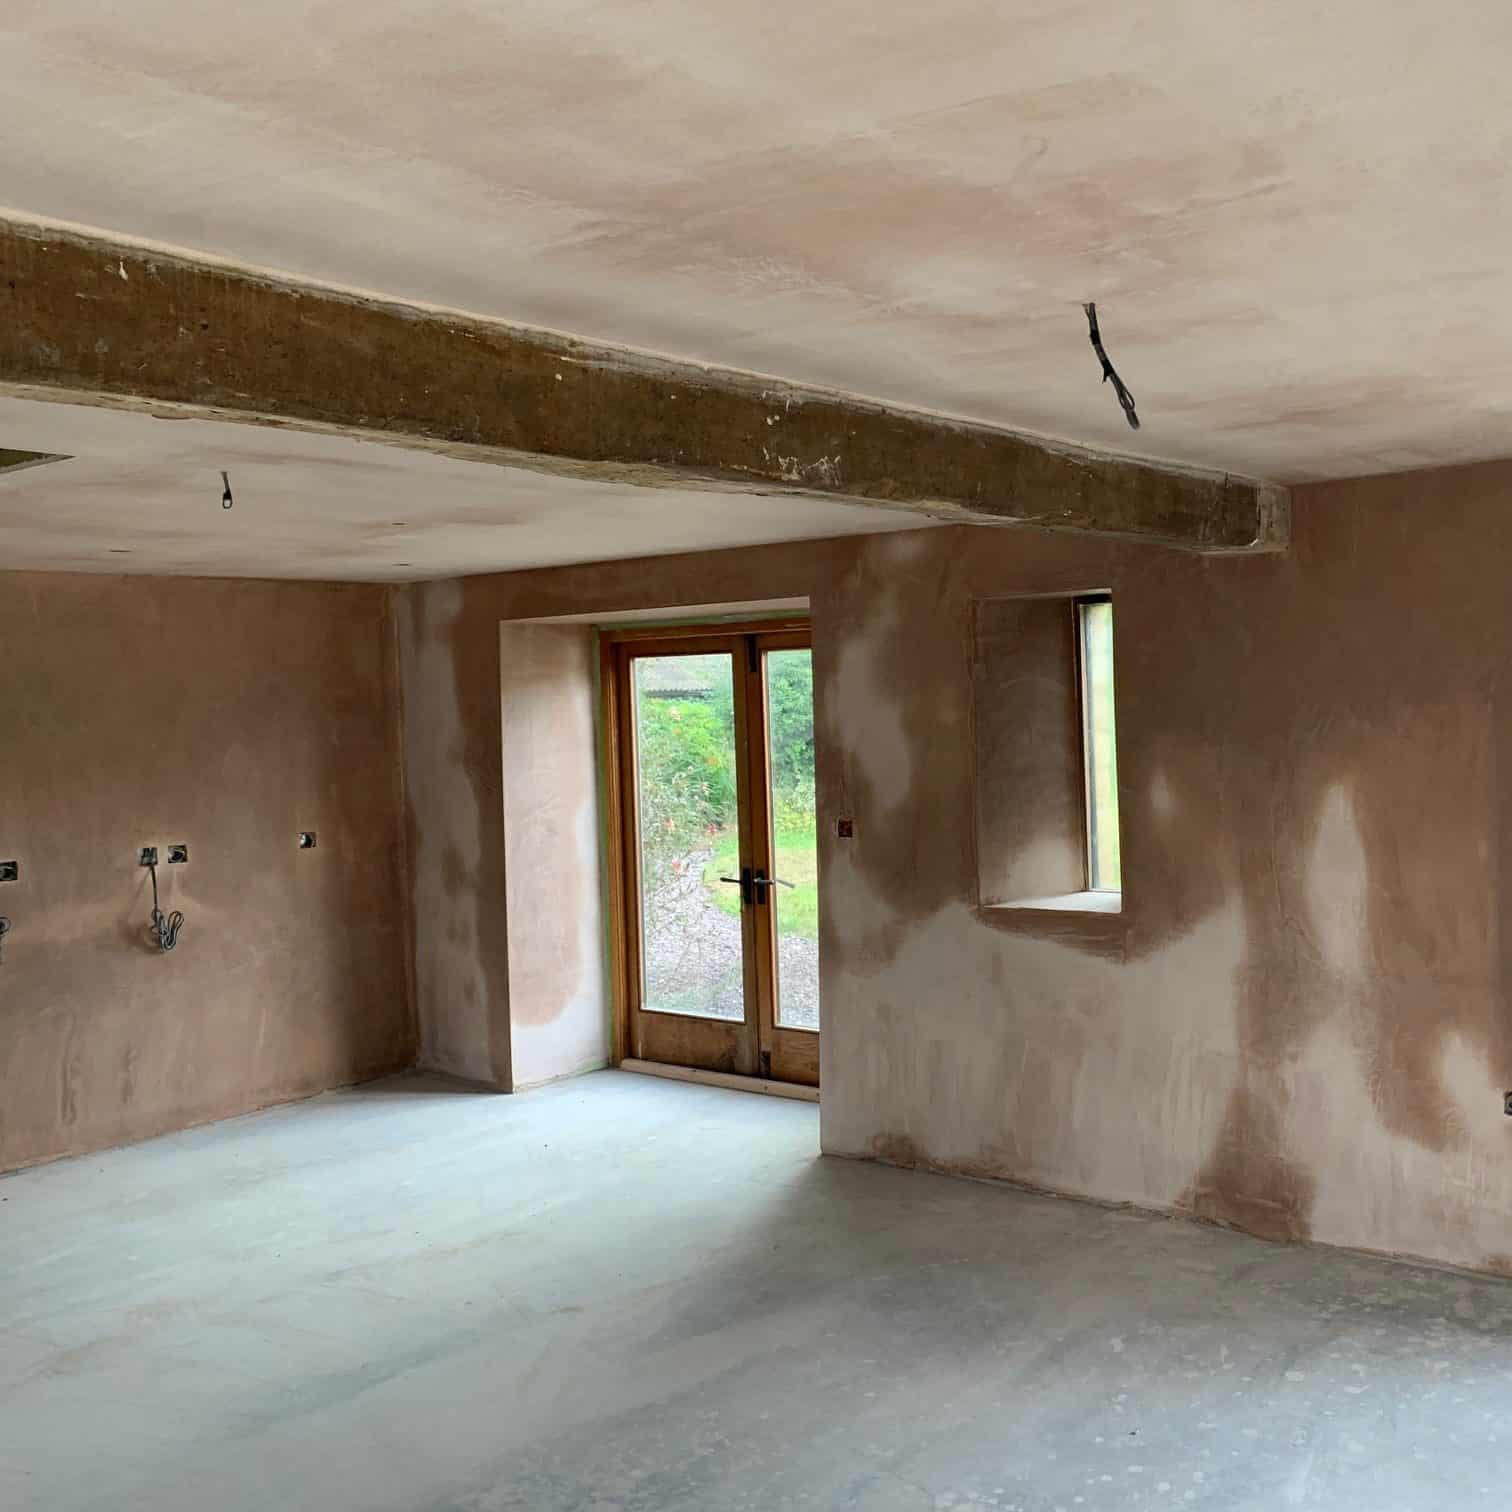 Plastering in build extension